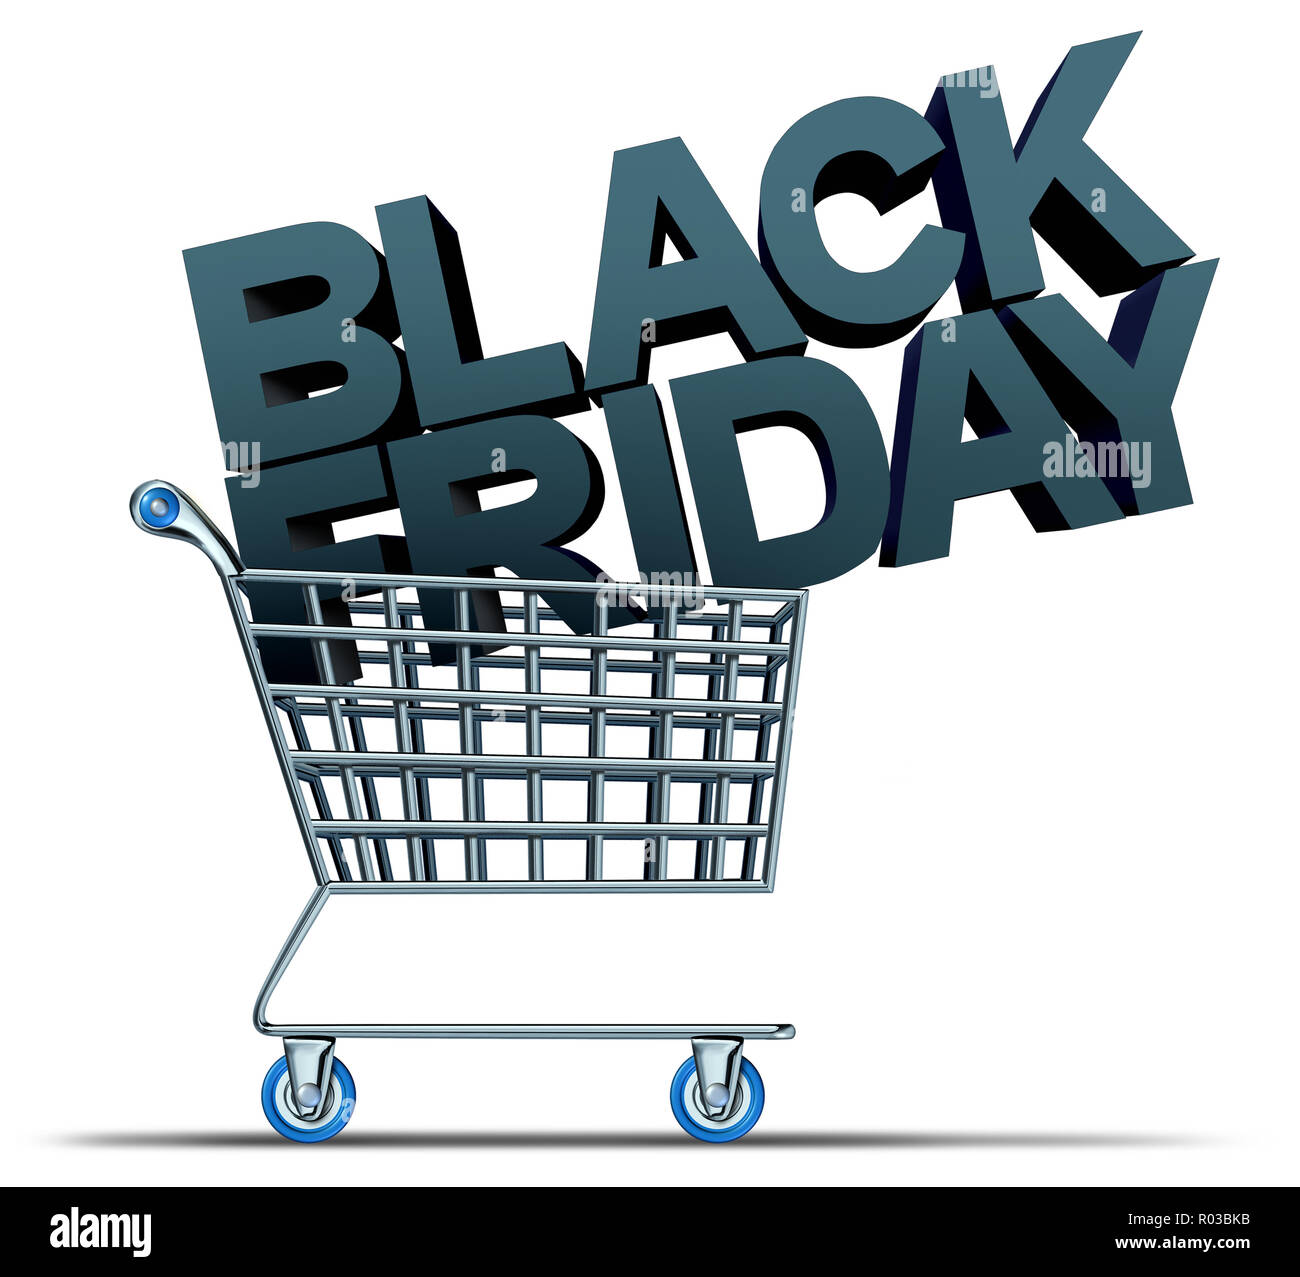 Black friday shopping and a November holiday retail sale as a seasonal promotion as a 3D illustration. Stock Photo